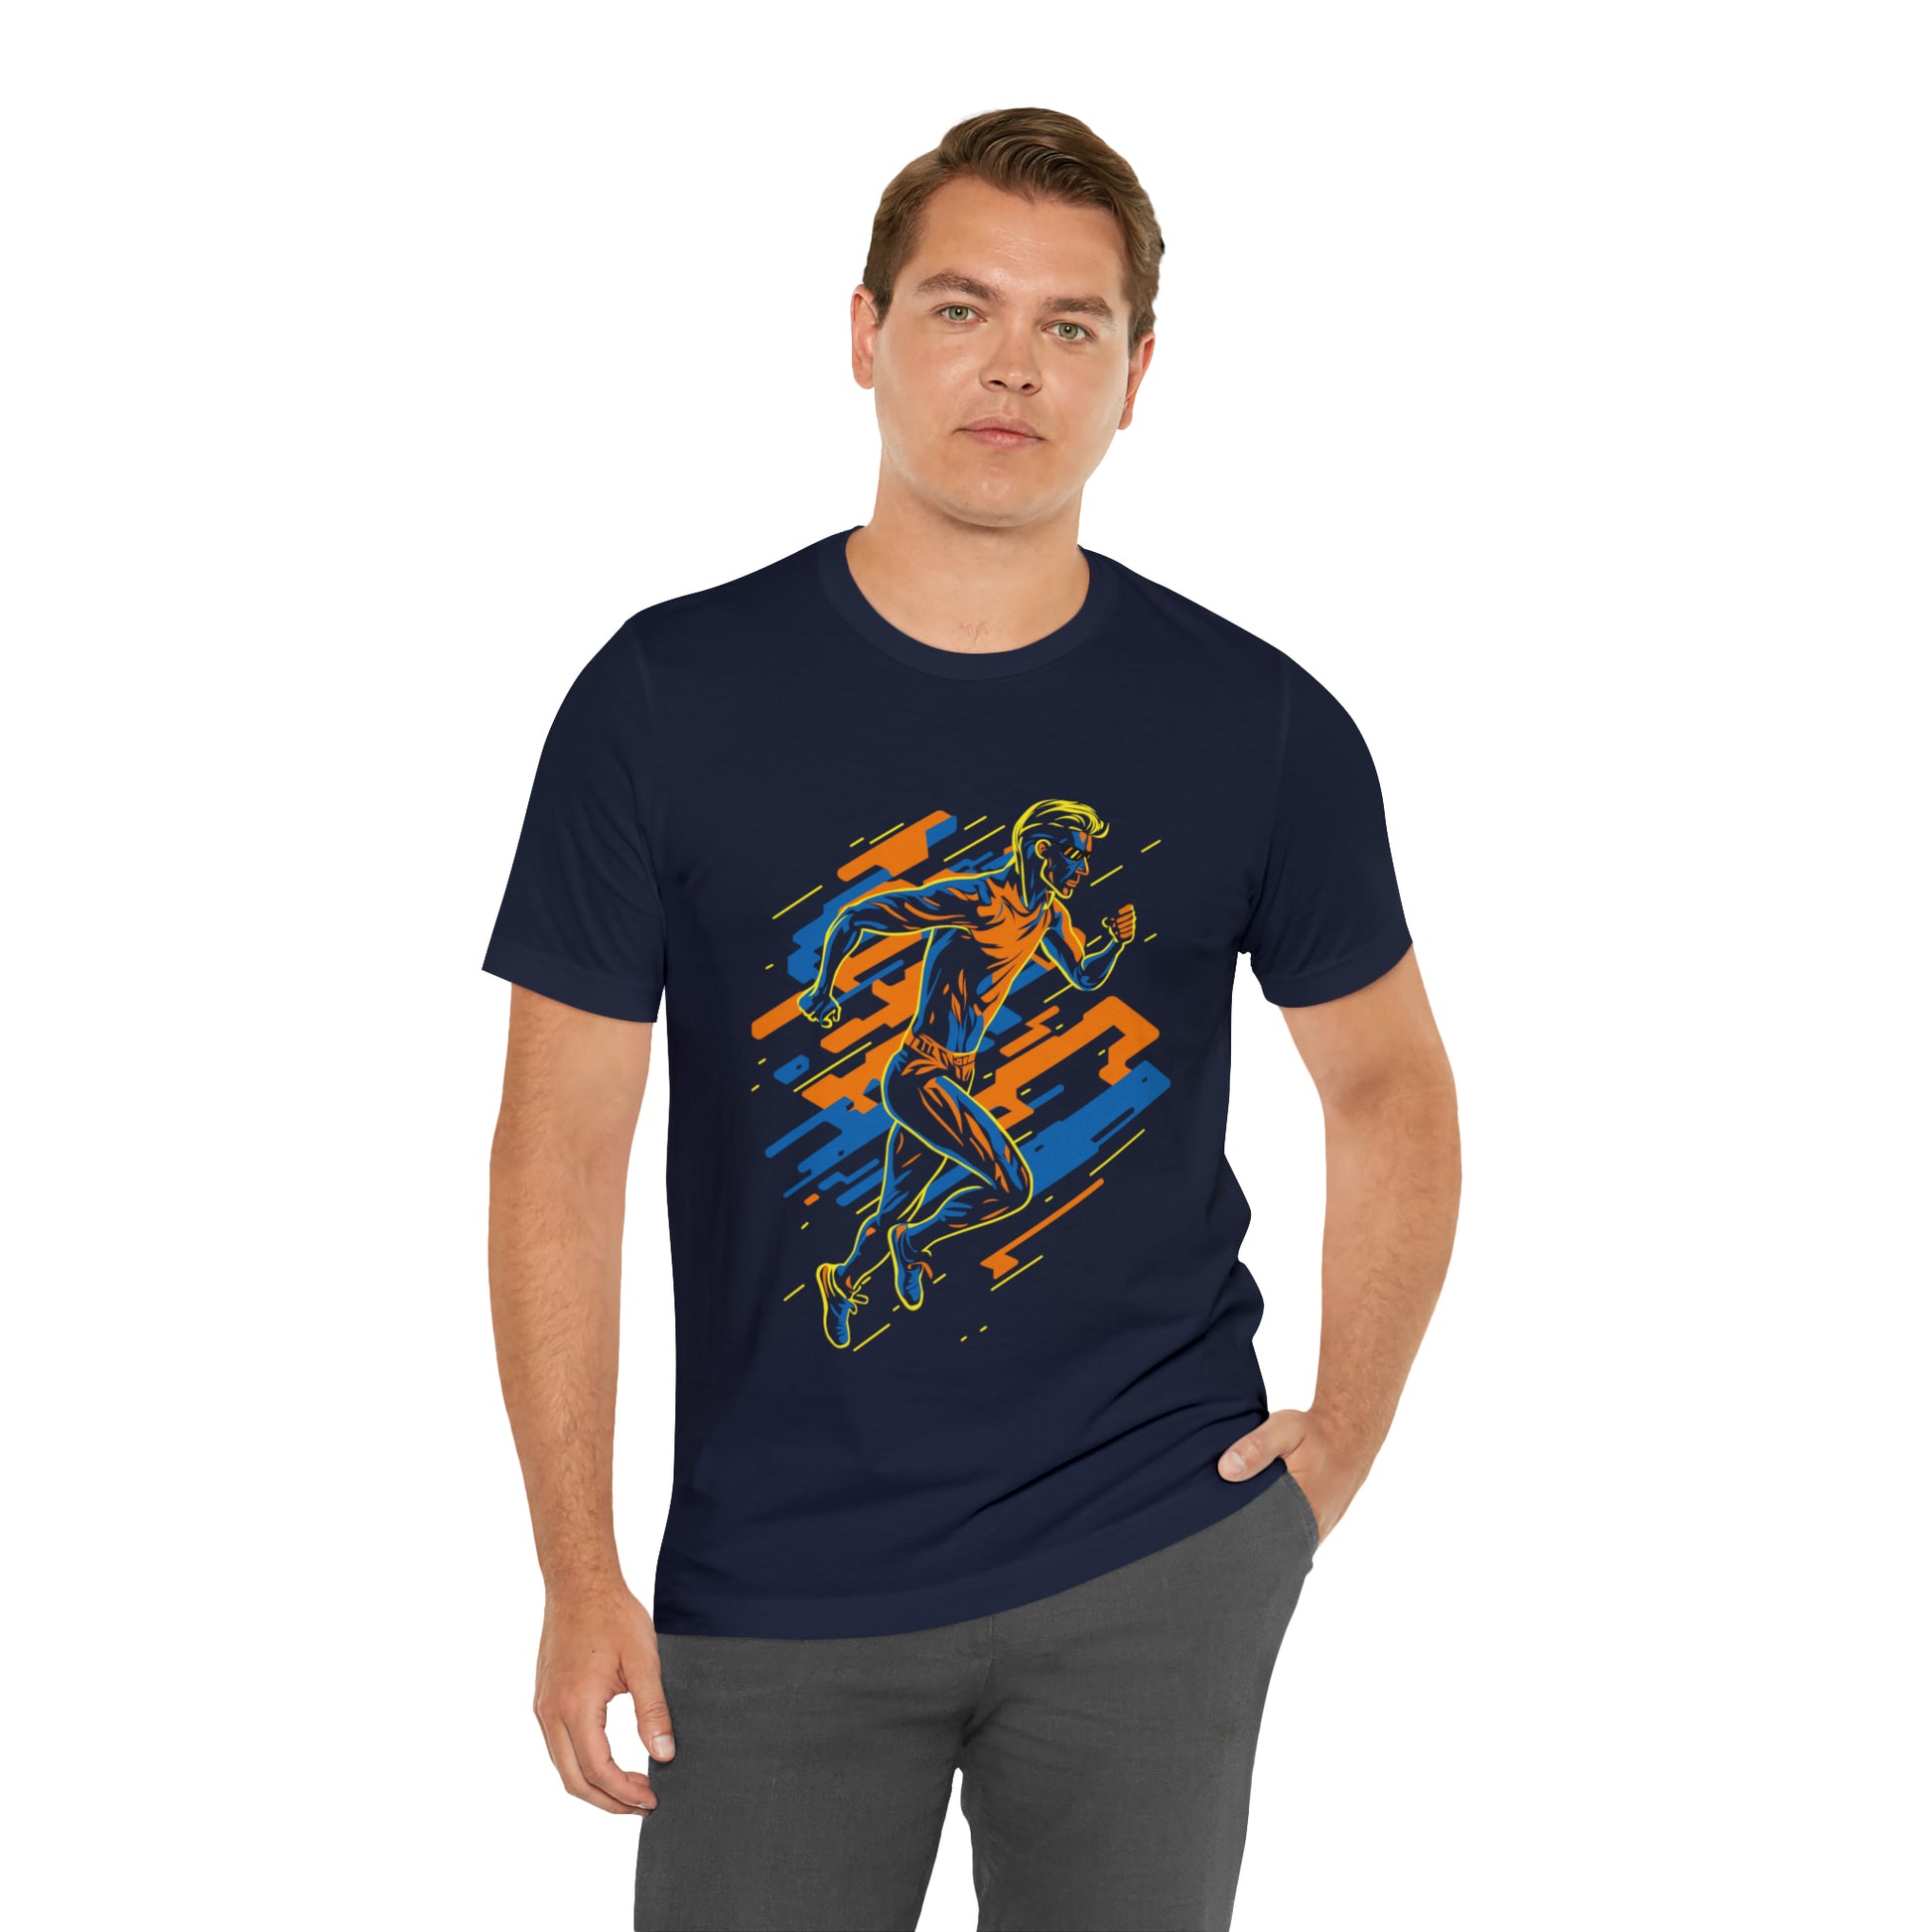 Navy T-Shirt featuring a vibrant and dynamic runner design, capturing the energy of a 'Running Man'. Taken from the TEQNEON Radioactive collection